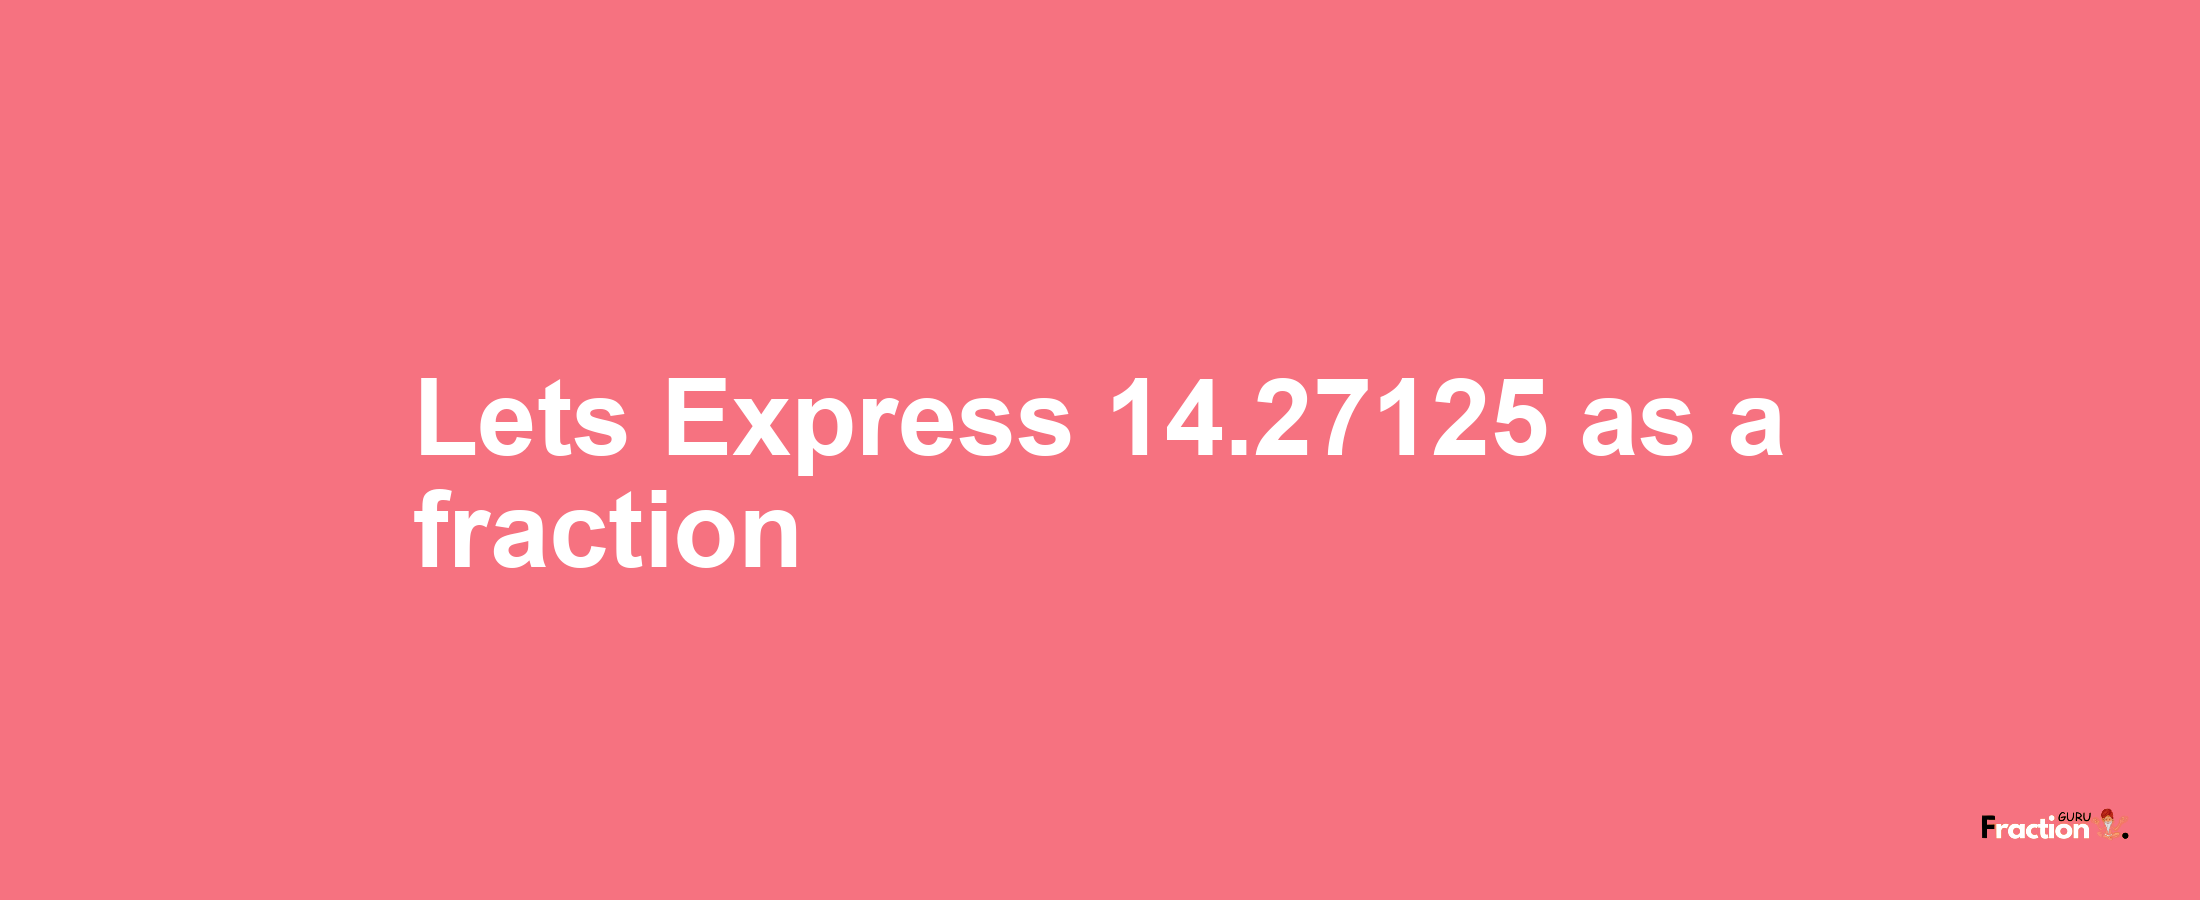 Lets Express 14.27125 as afraction